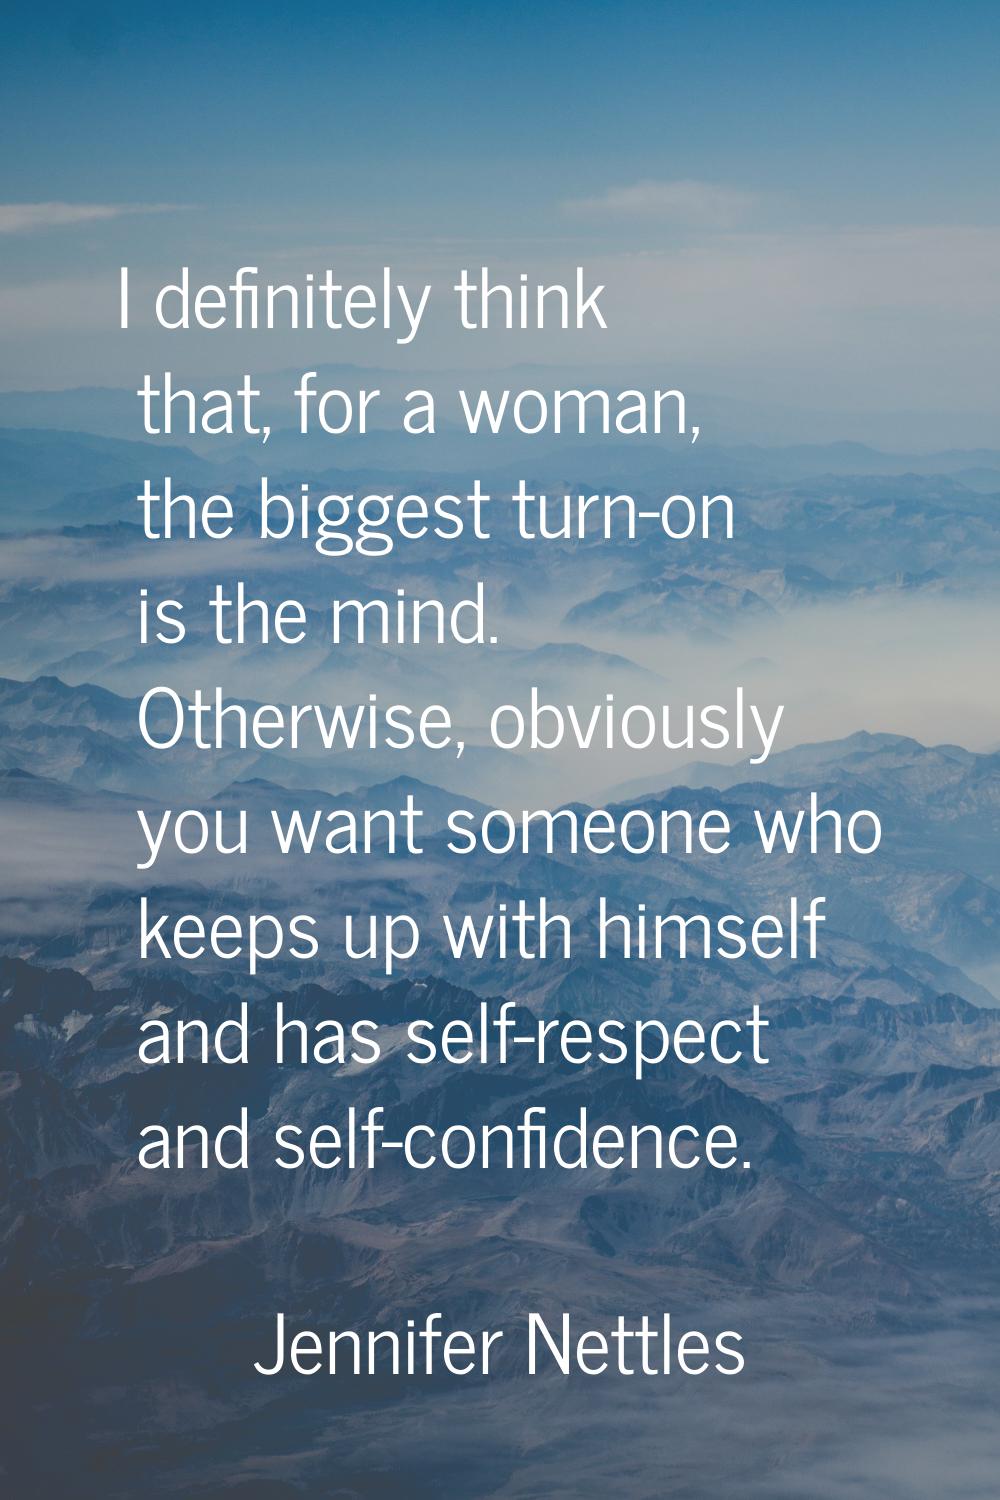 I definitely think that, for a woman, the biggest turn-on is the mind. Otherwise, obviously you wan